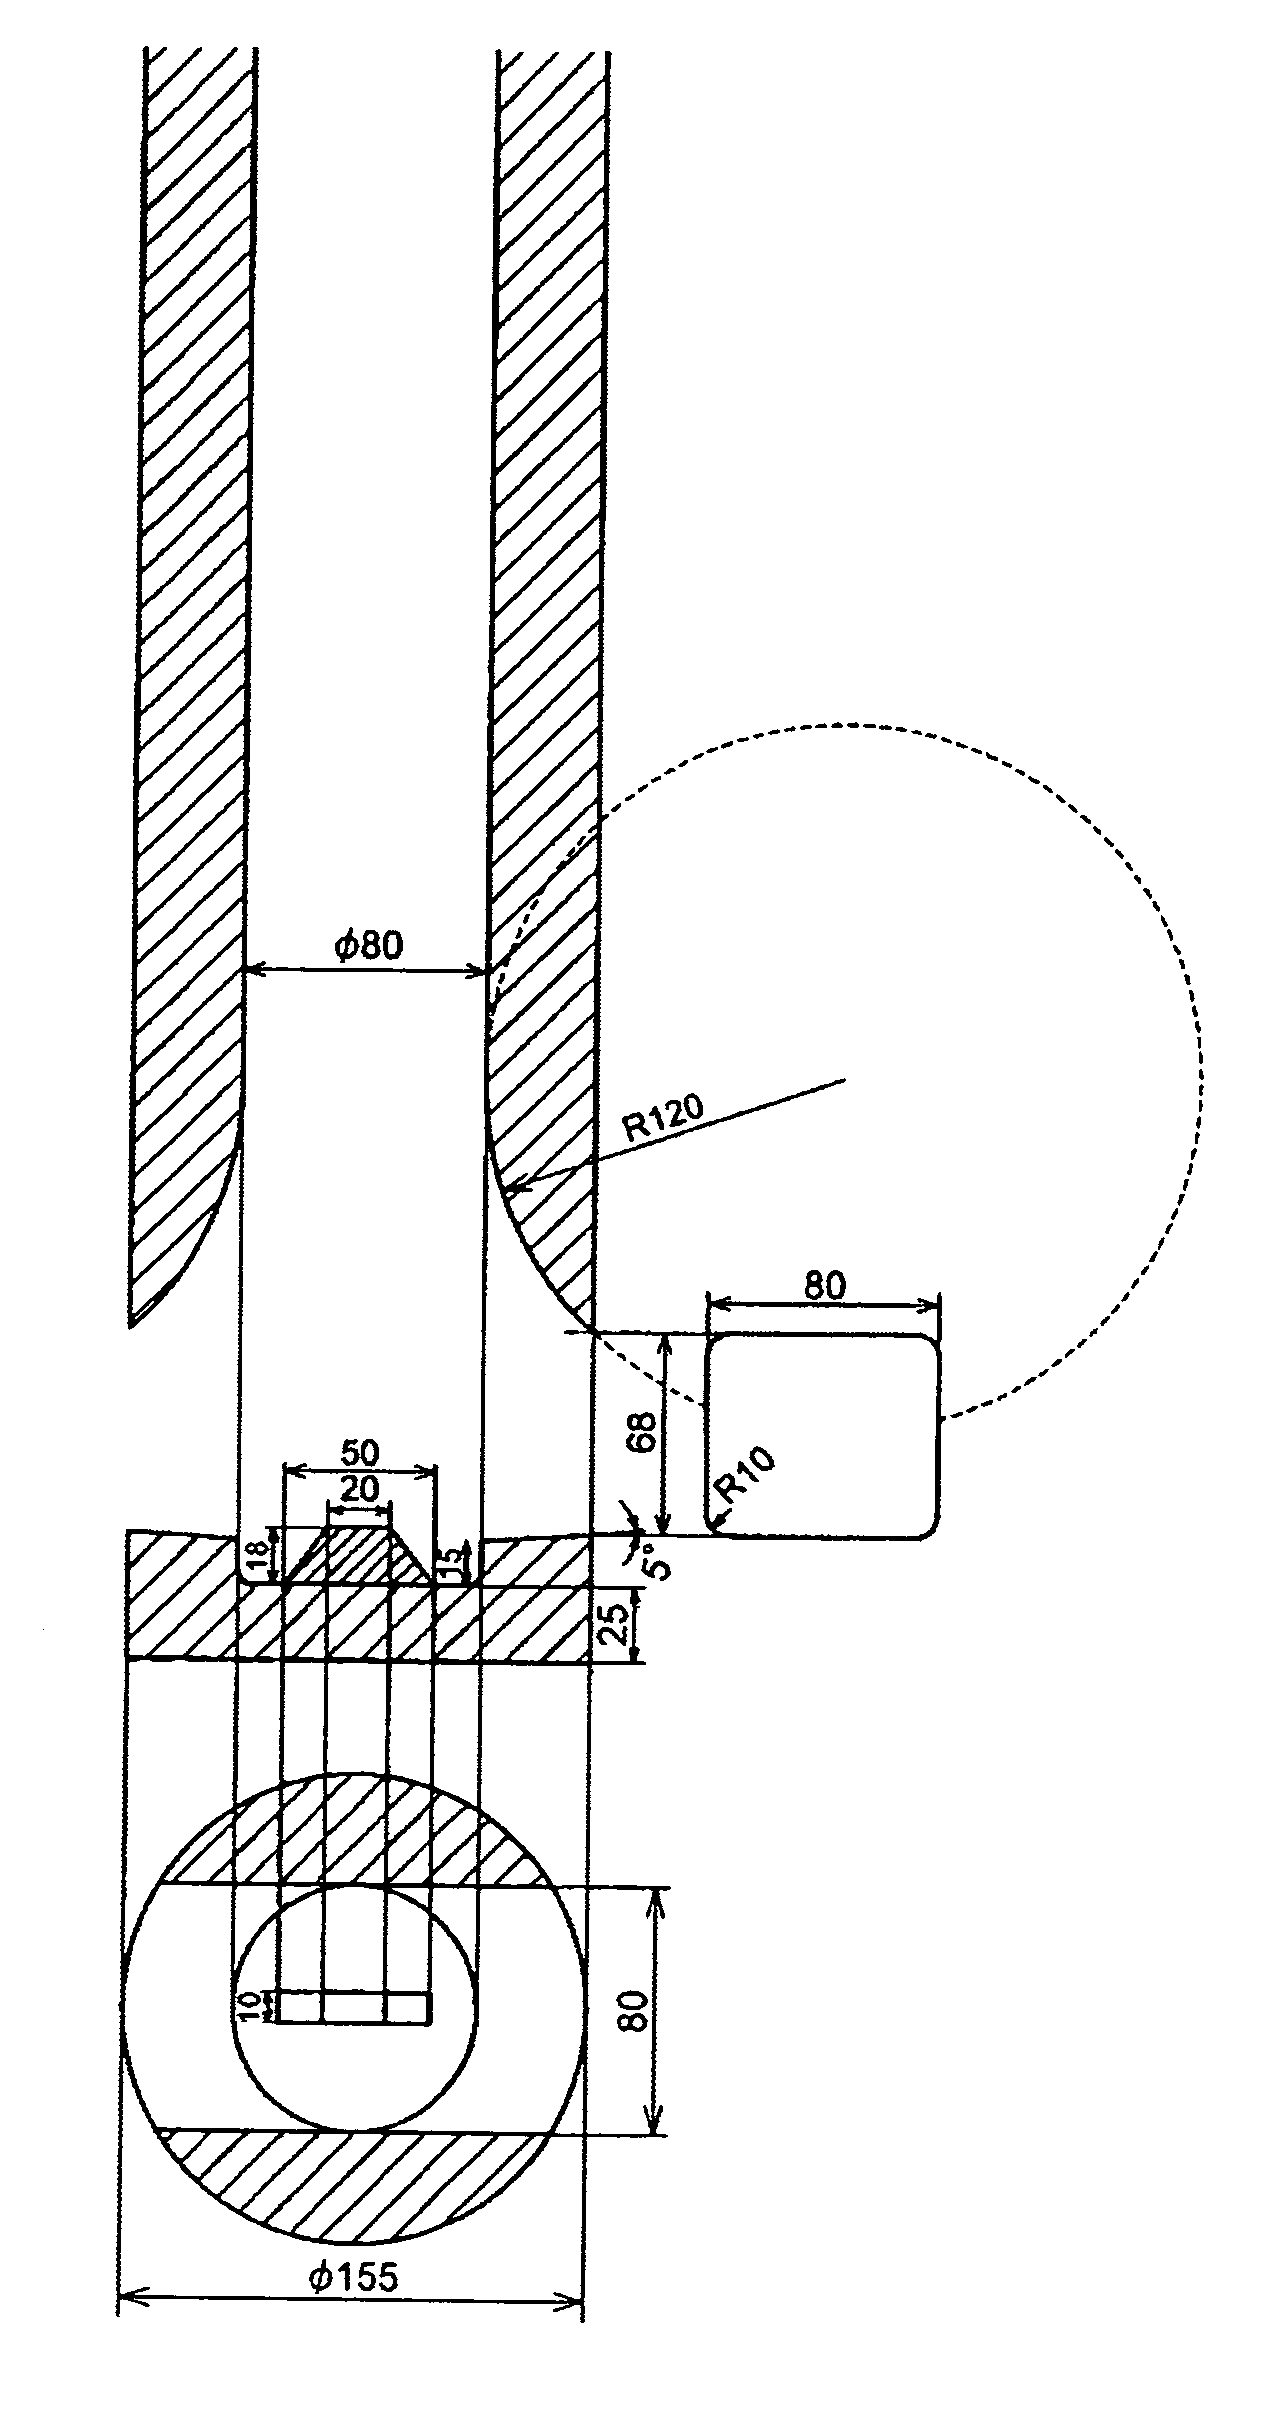 Immersion nozzle for continuous casting and continuous casting method using the immersion nozzle